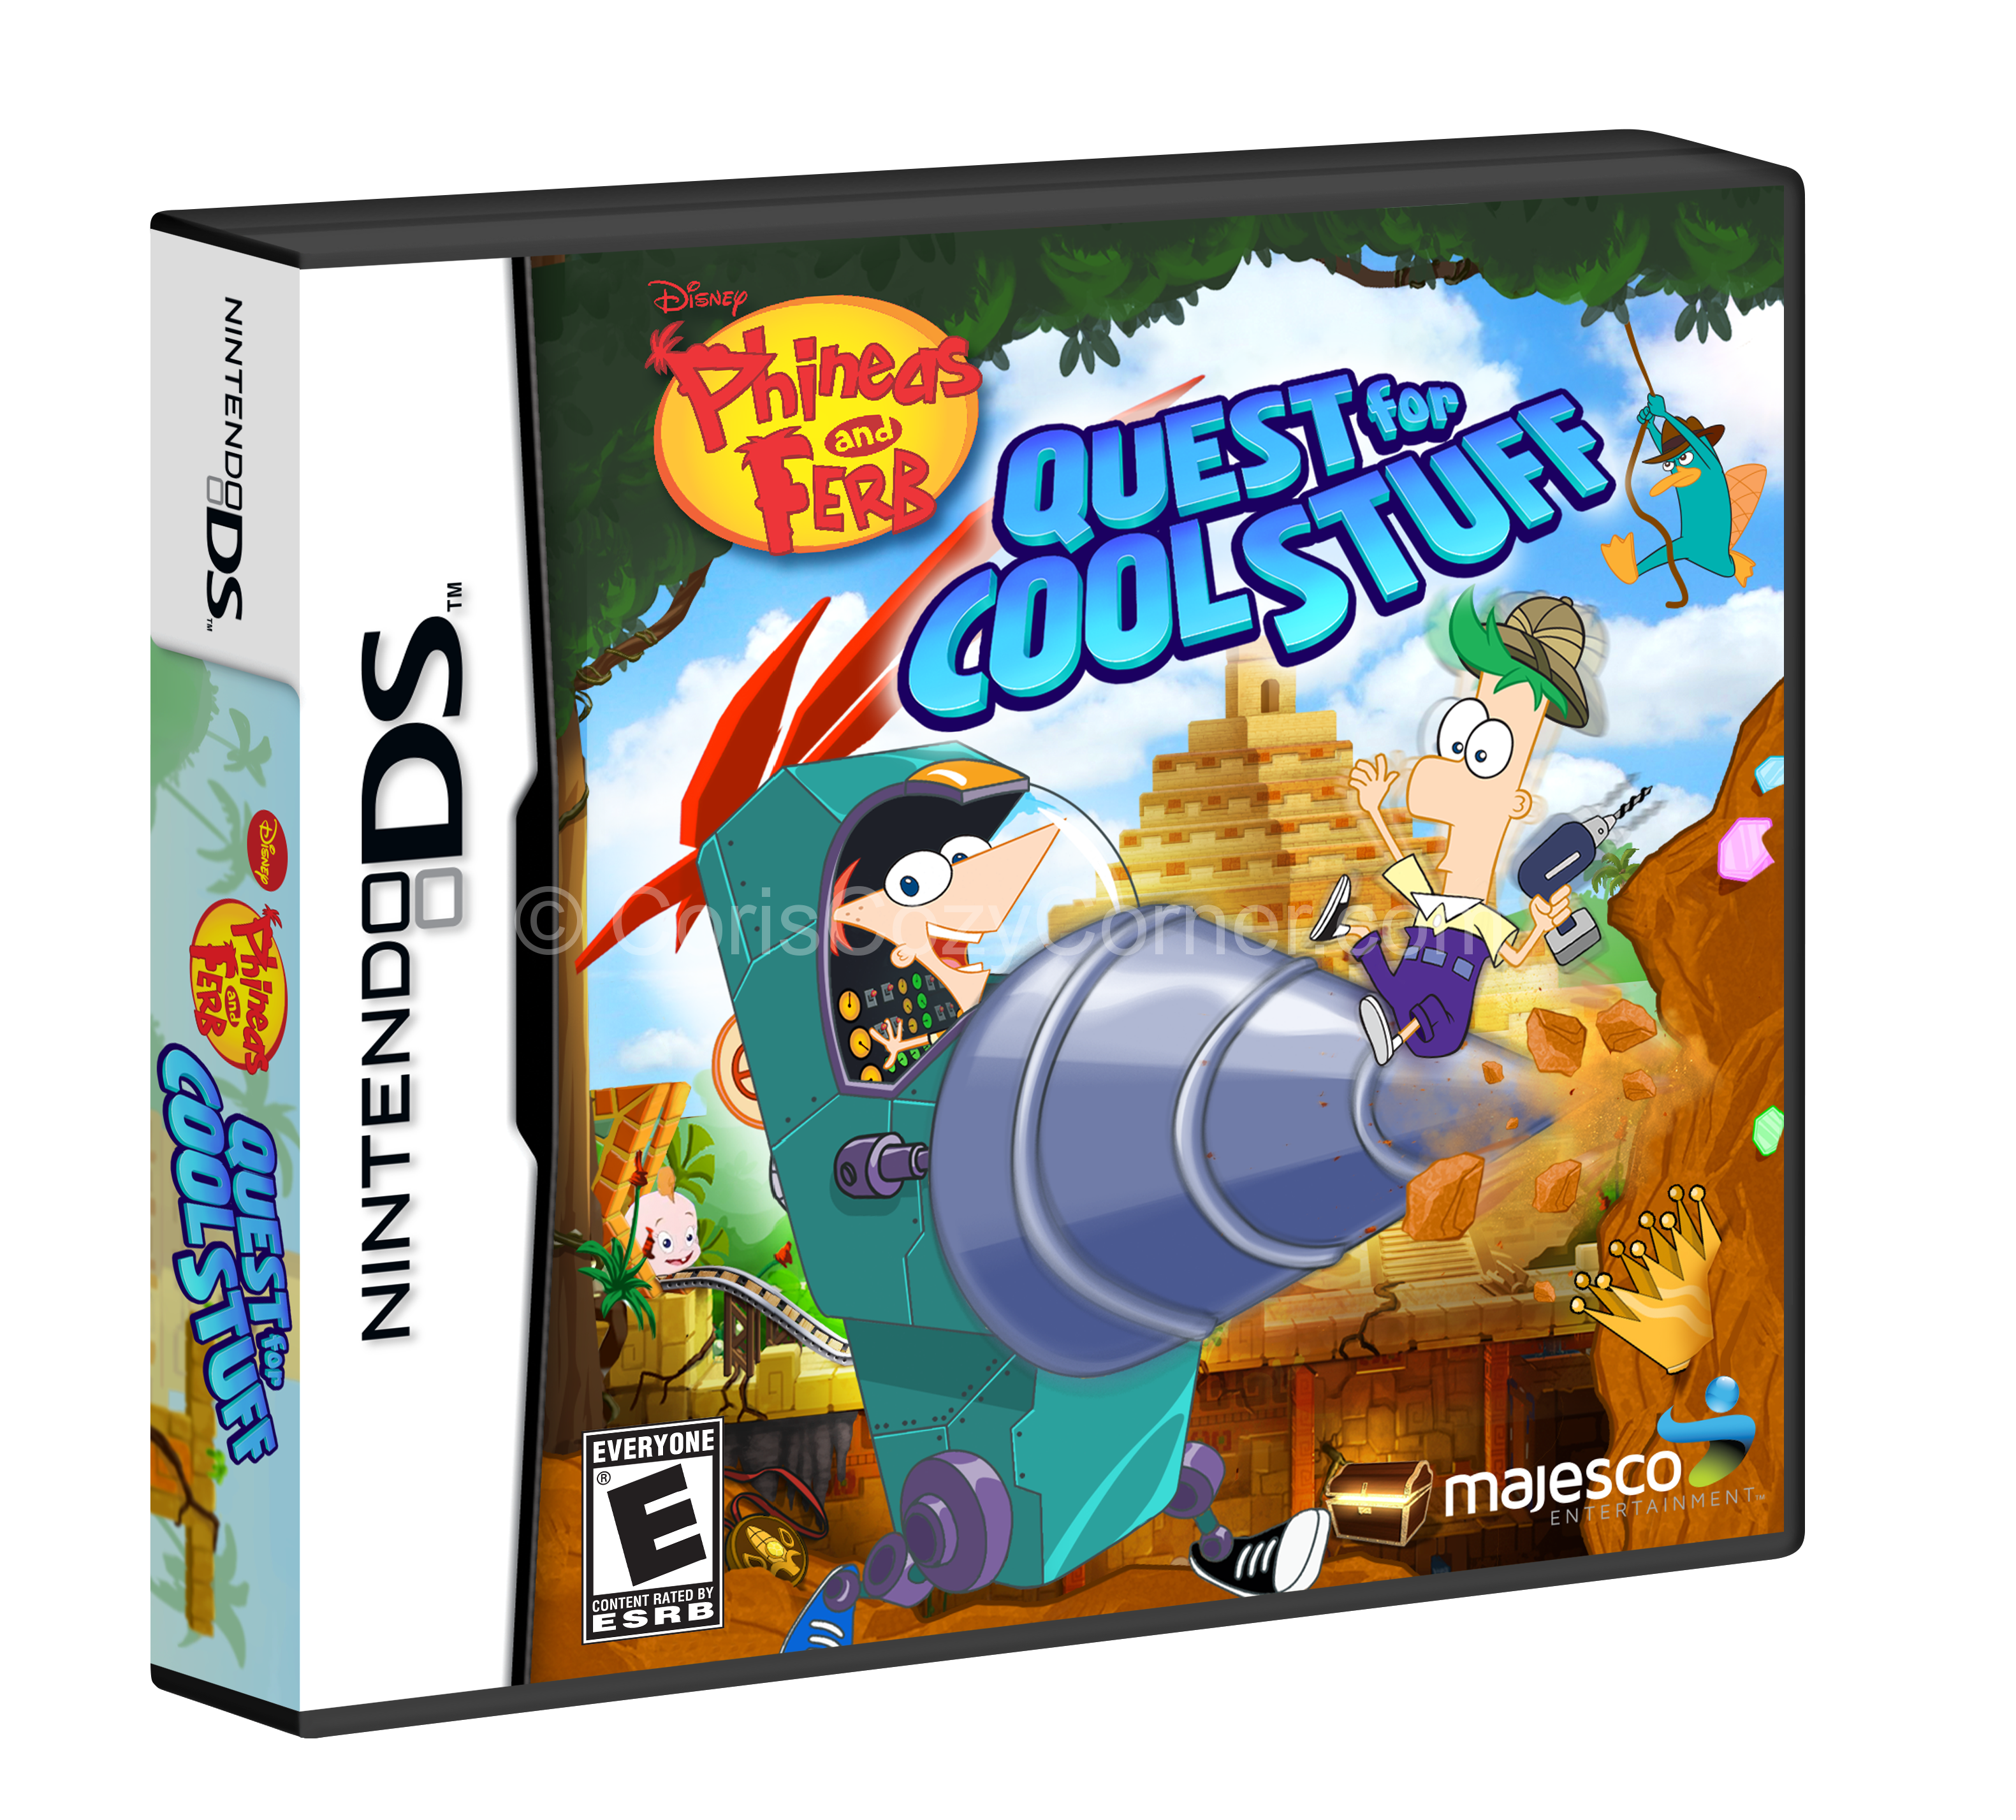 Phineas and Ferb Quest For Cool Stuff Nintendo 3Ds Game Product Review ...